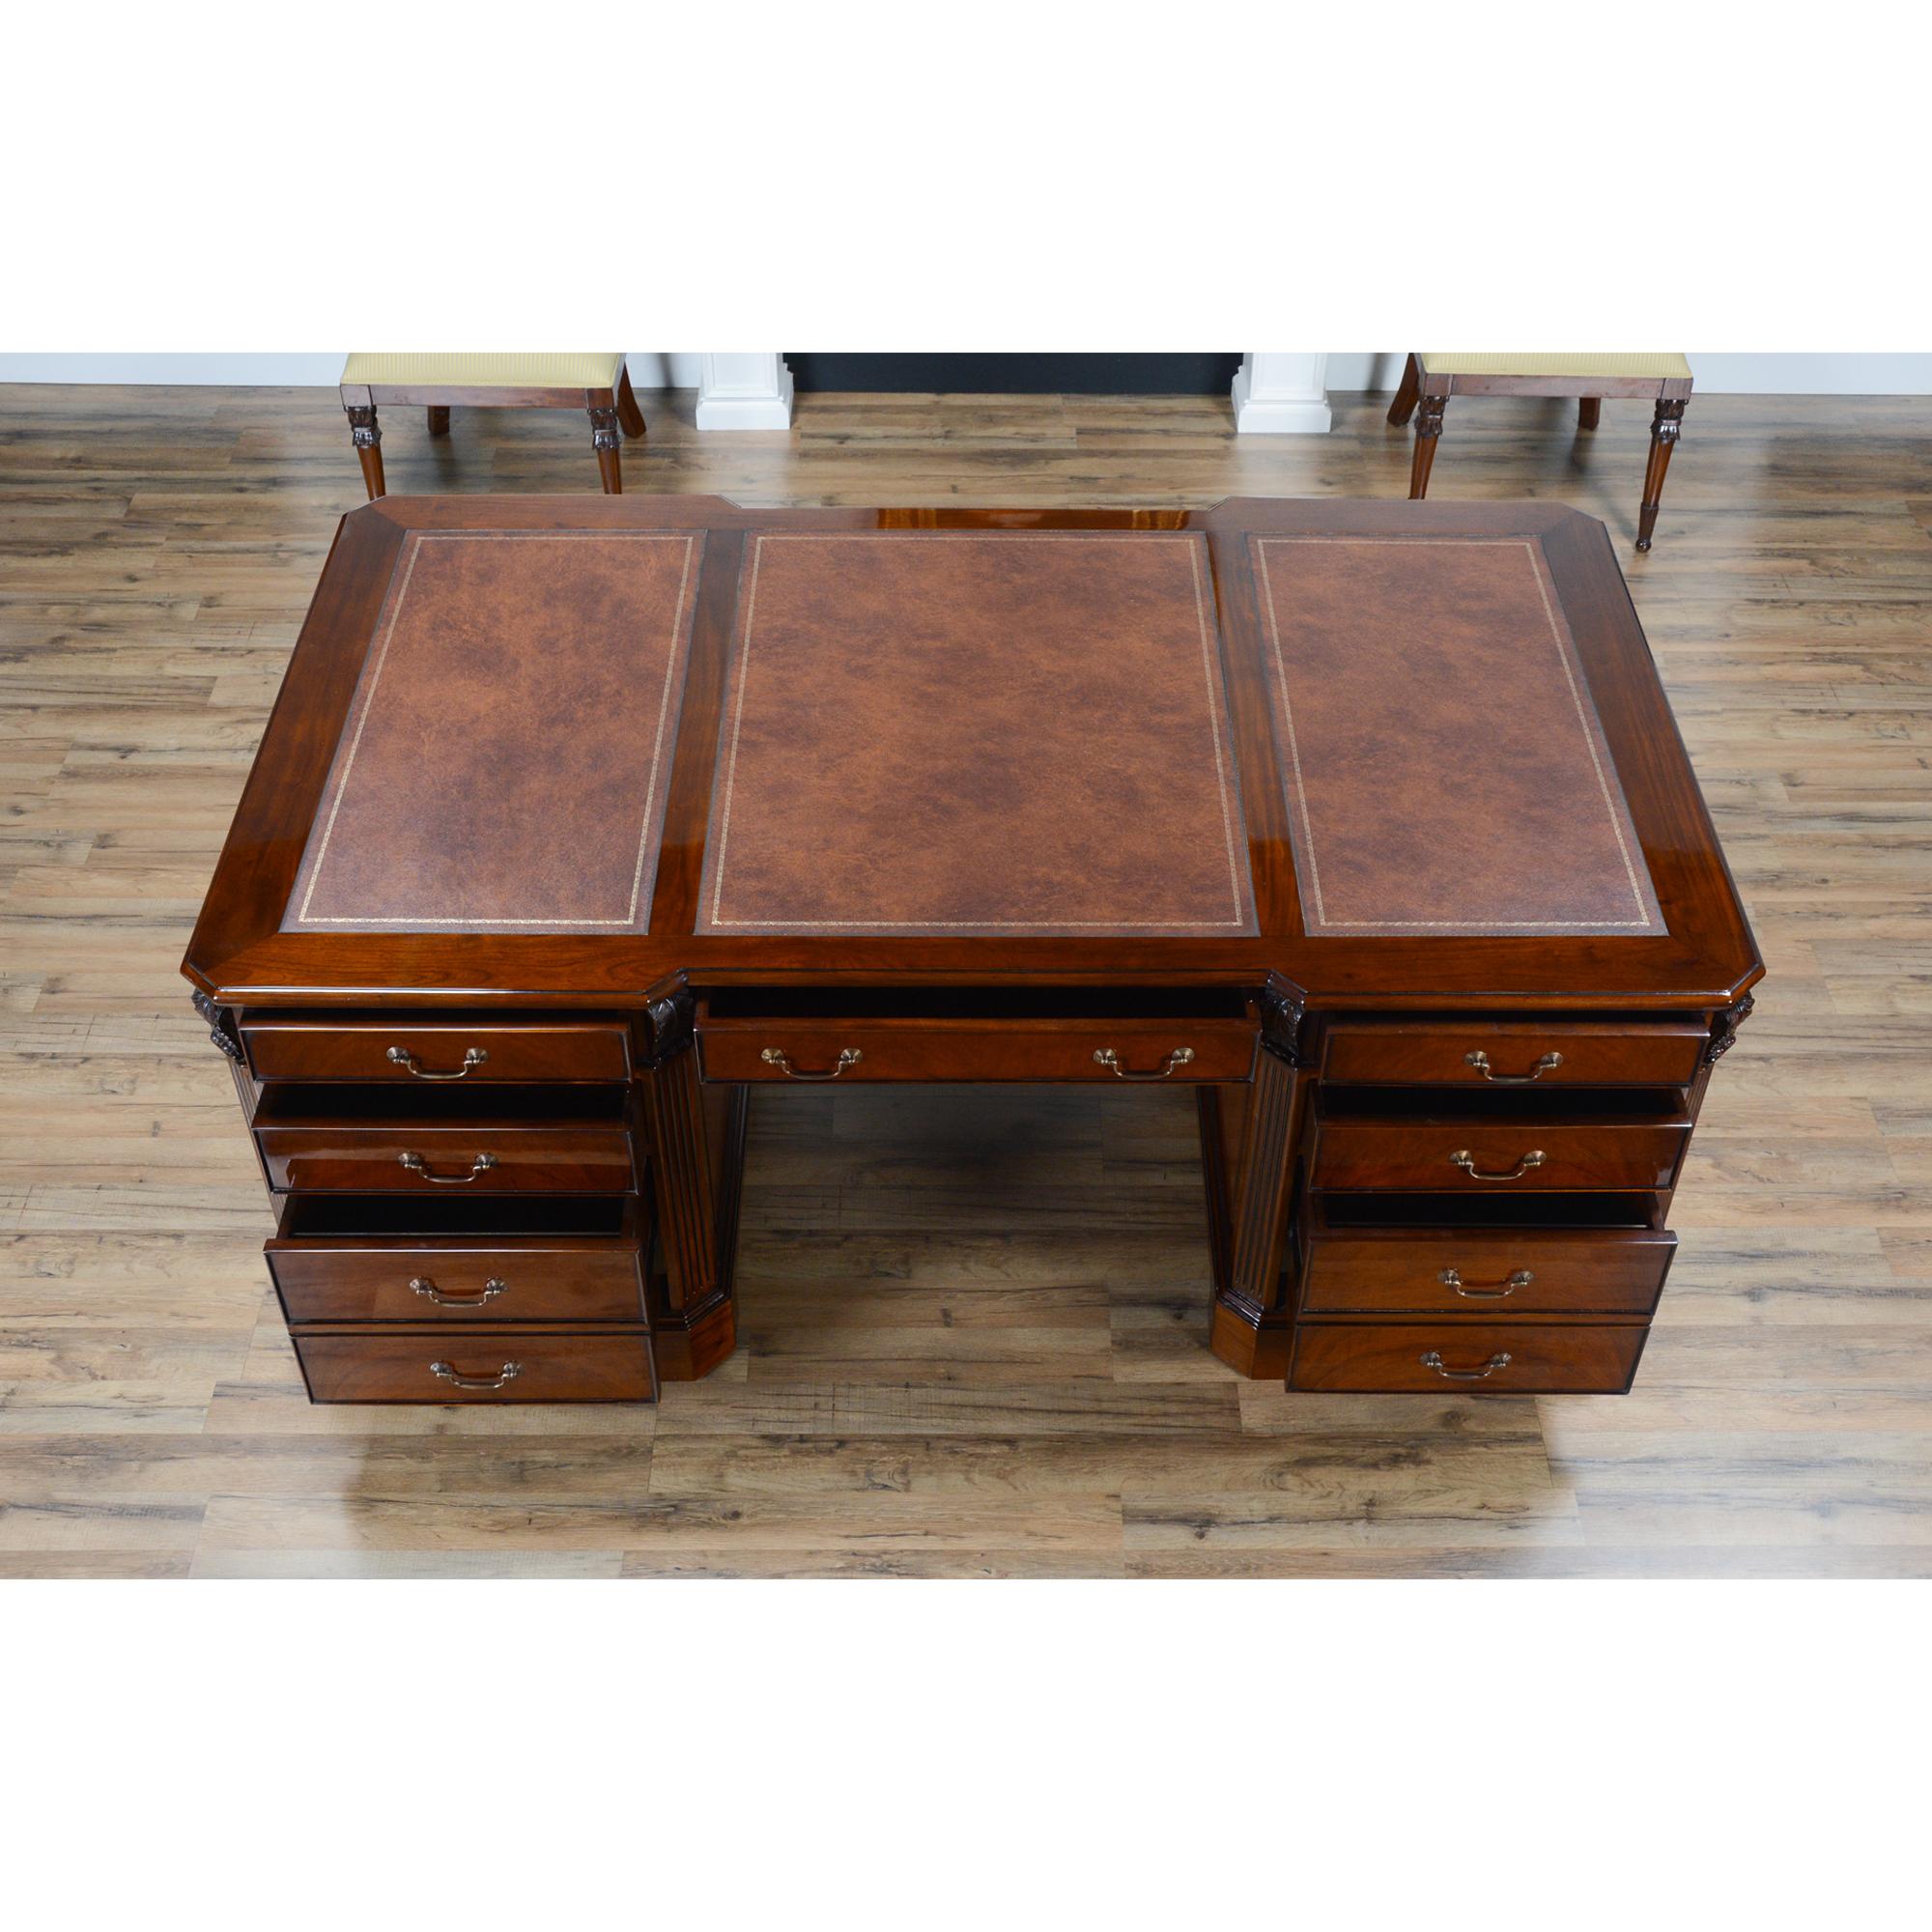 The Large Mahogany Partner Desk is the biggest desk in the Niagara Furniture collection. This desk matches a number of other pieces which we produce in the Penhurst family, please see the links below for related products. The fantastic solid